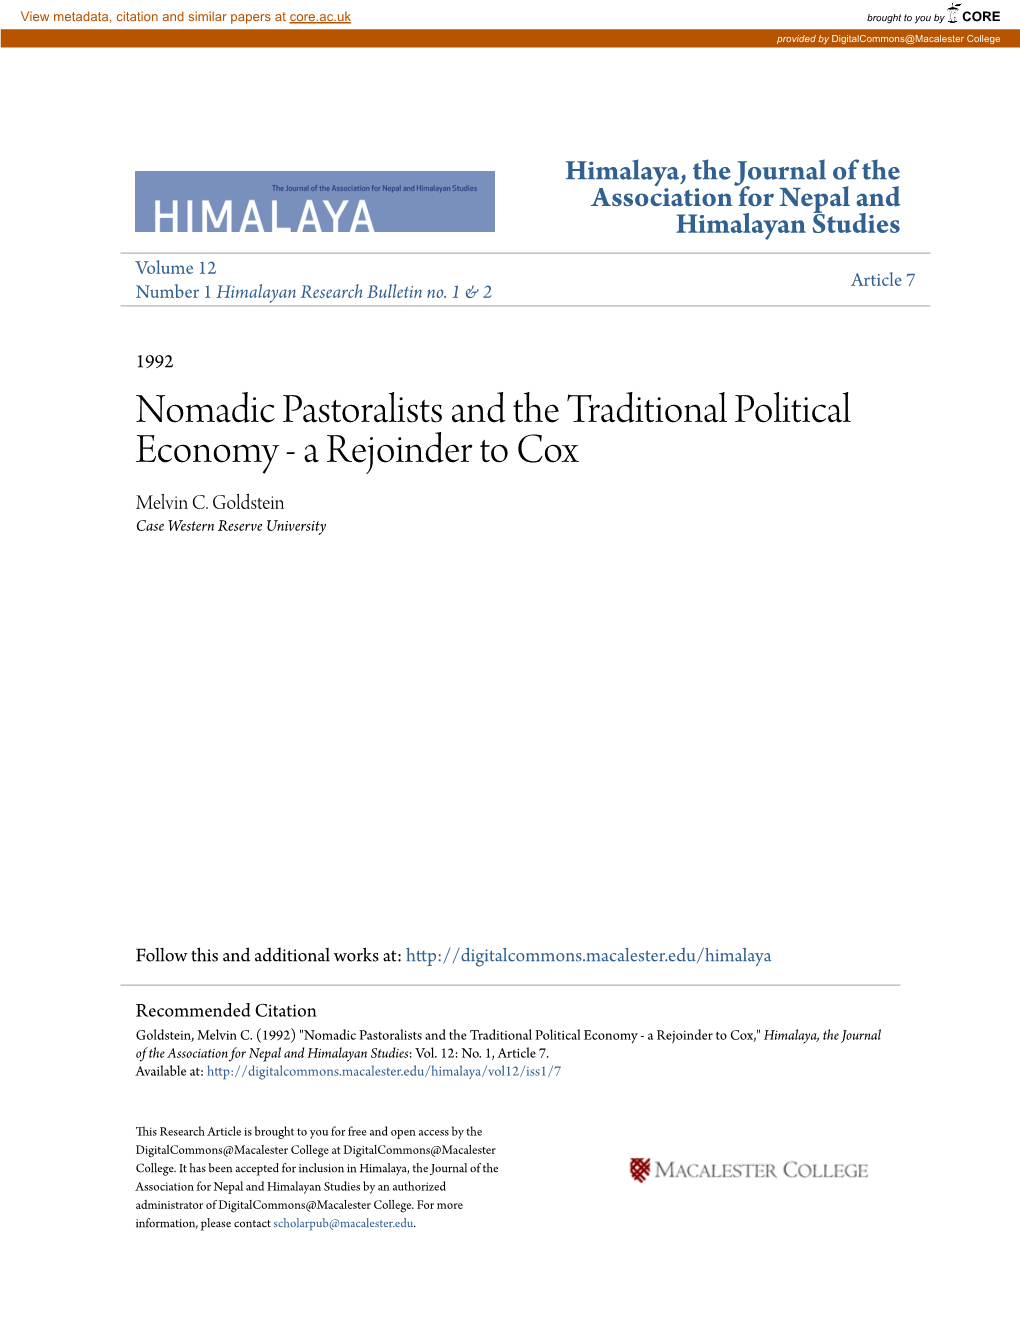 Nomadic Pastoralists and the Traditional Political Economy - a Rejoinder to Cox Melvin C